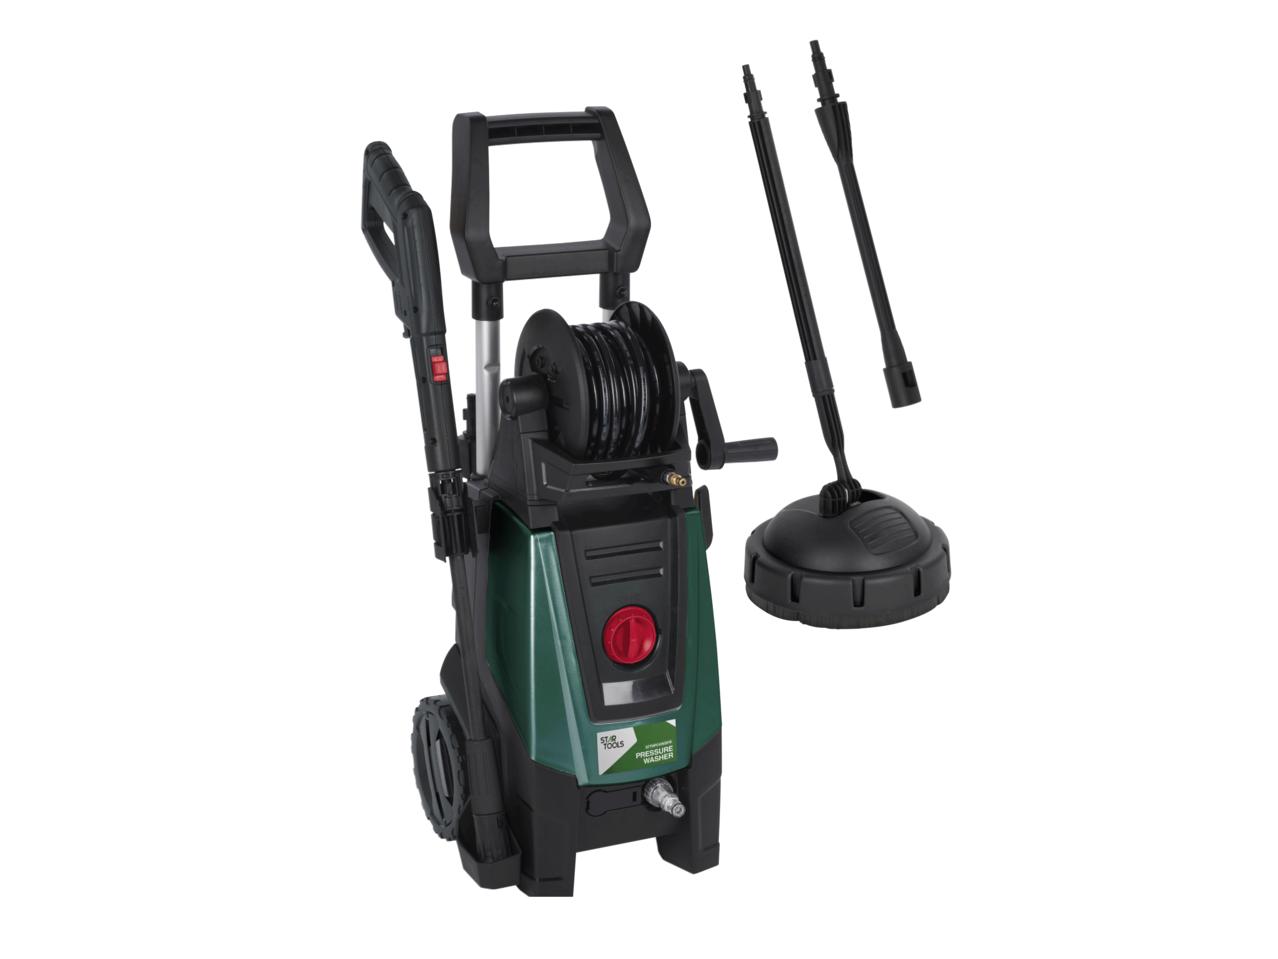 STARTOOL 2000W Pressure Washer with Complete Accessory Set